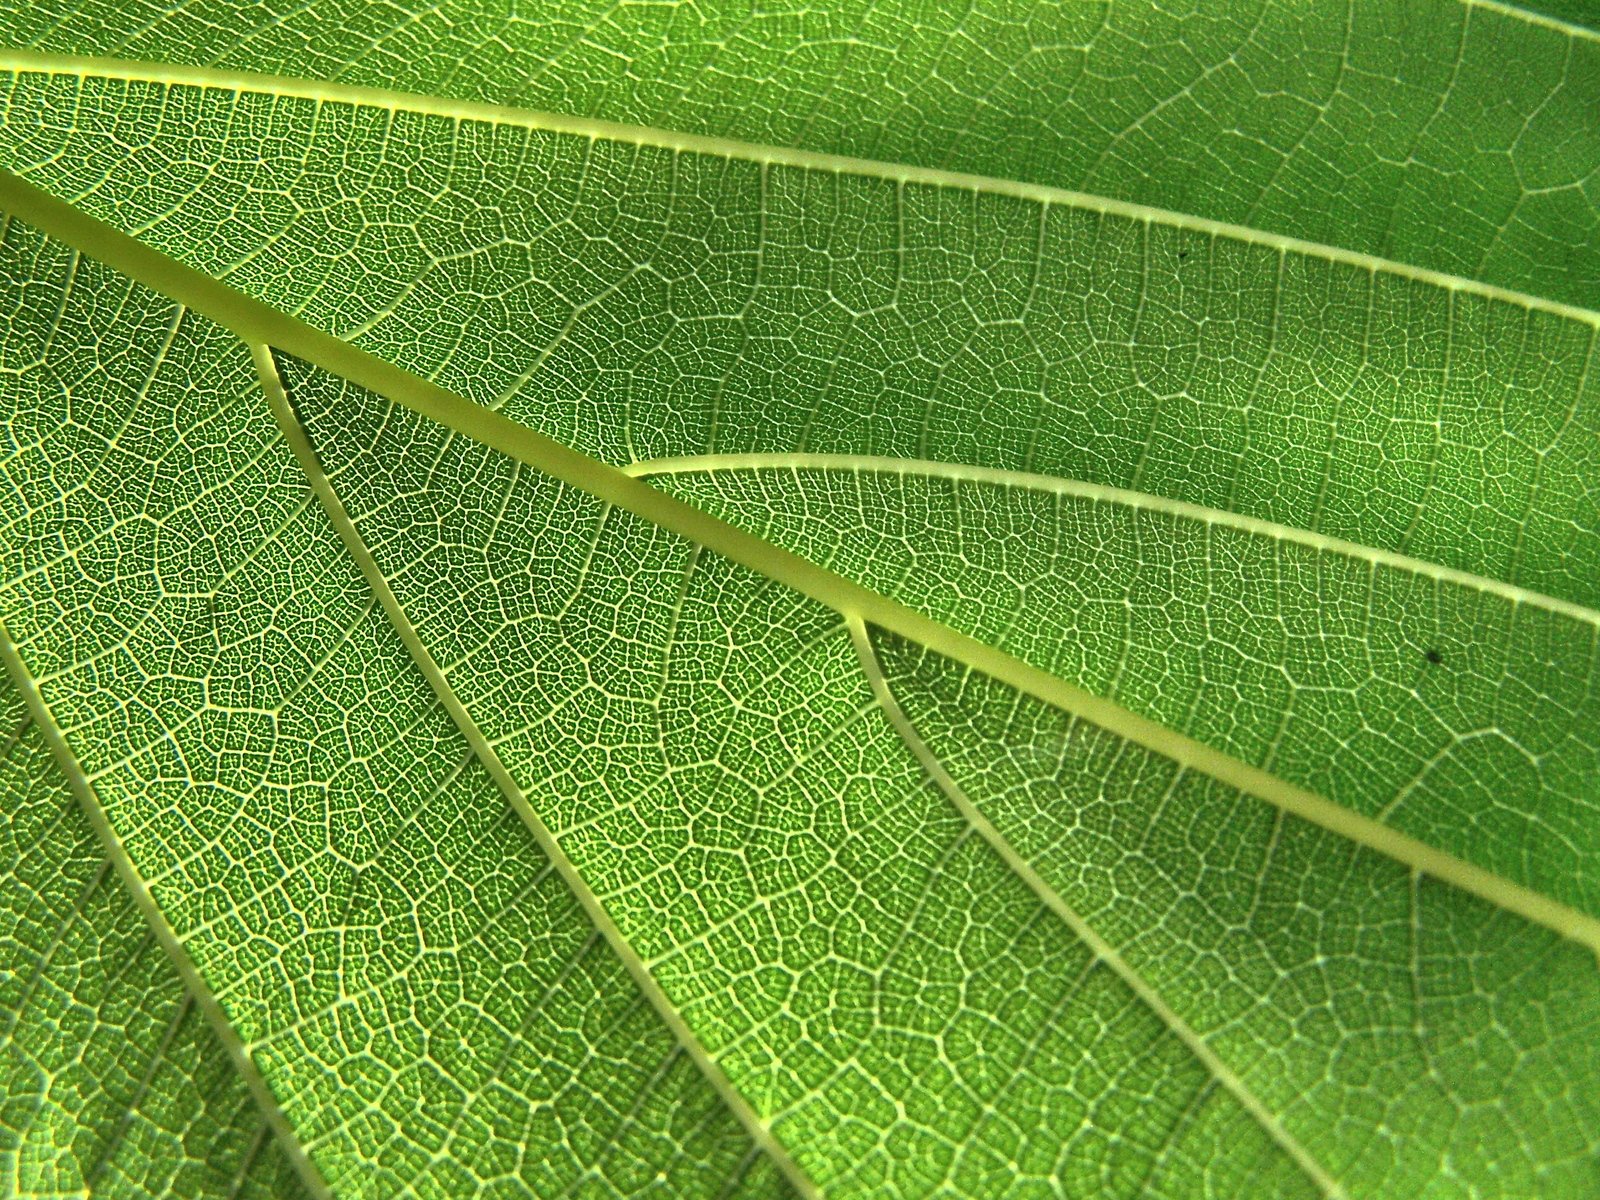 green leaf showing thin lines with tiny patterns